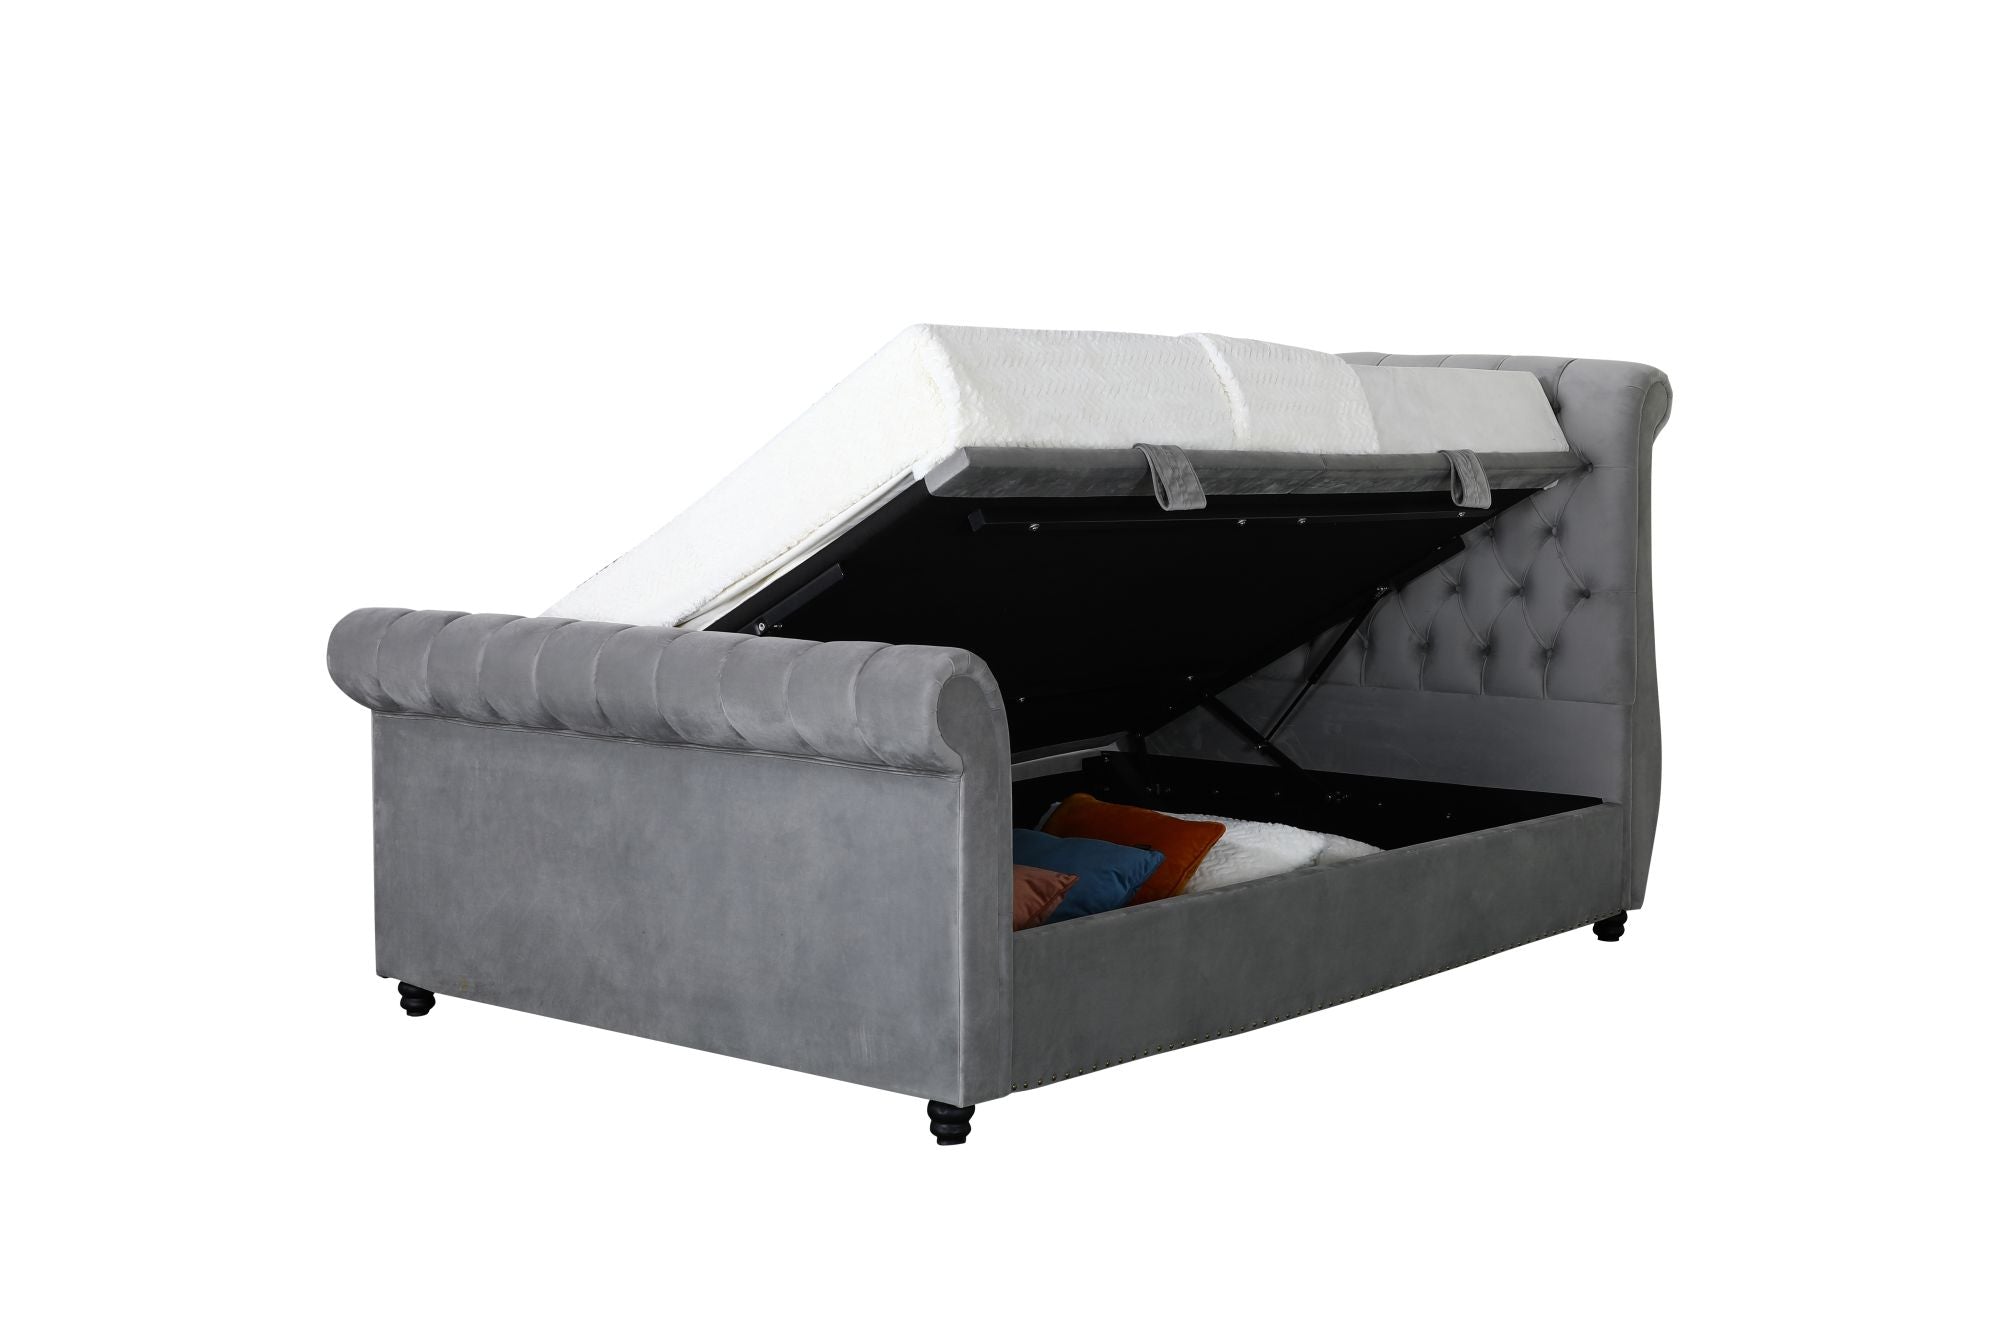 Mayfair Ottoman bedframe in Grey fabric with side open on white background